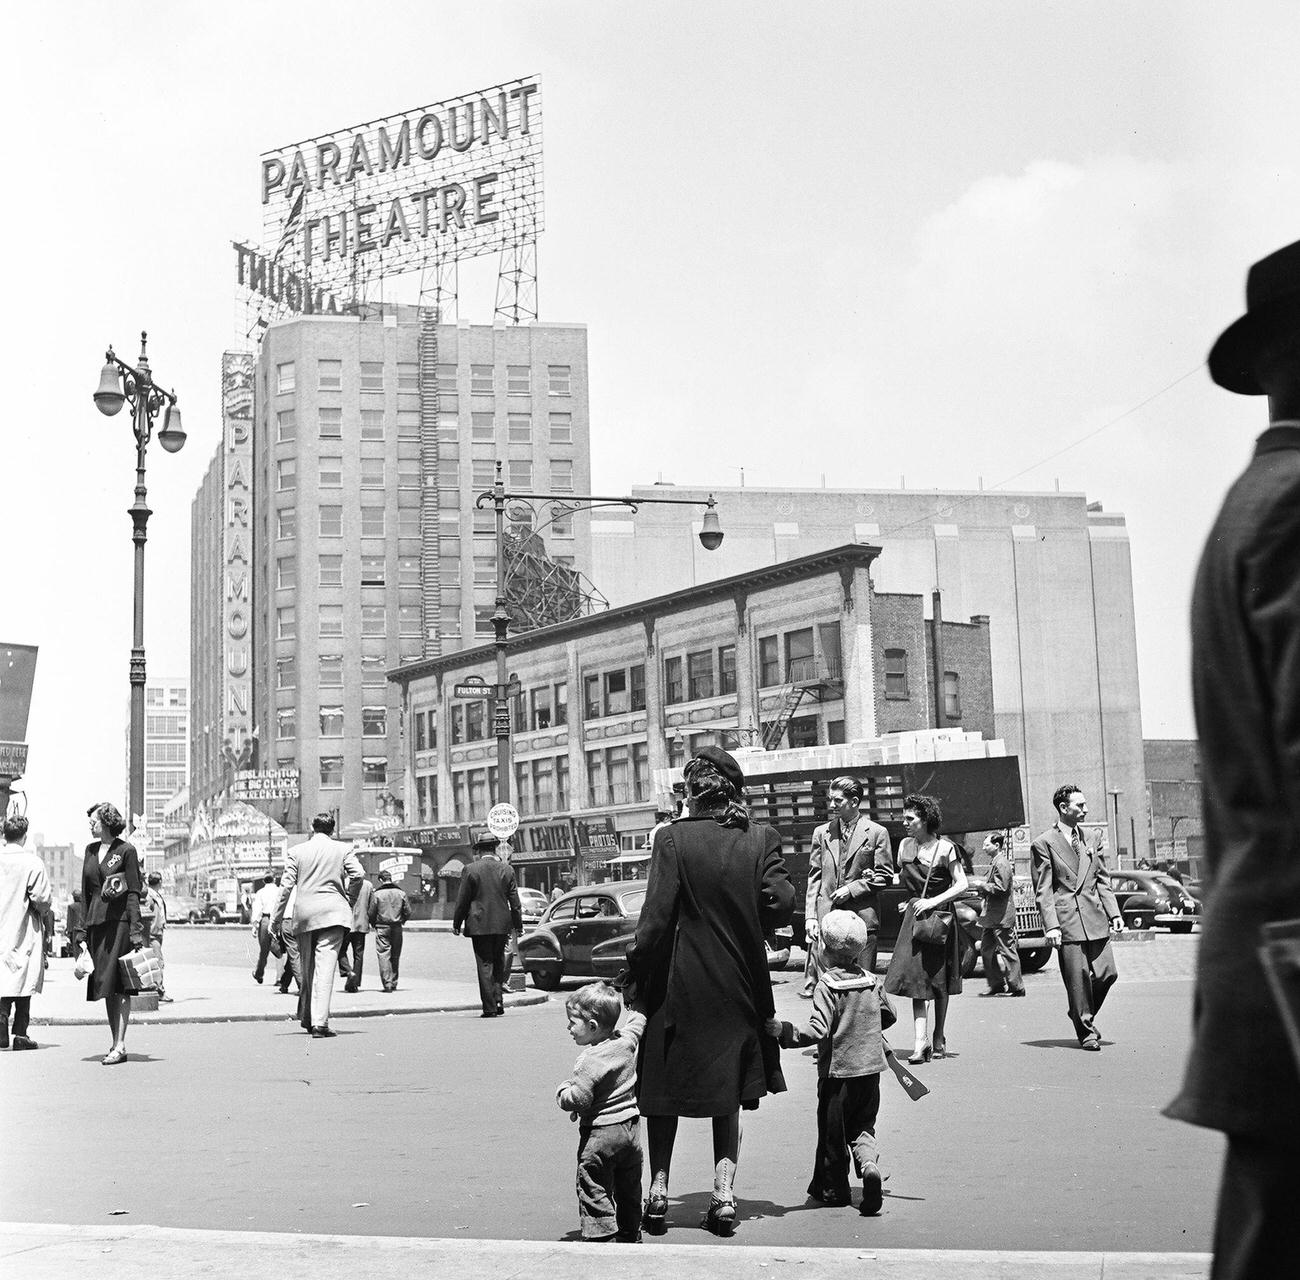 The Intersection Of Fulton Street And Flatbush Avenue, Towards The Paramount Theatre, Brooklyn, New York, New York, 1948.